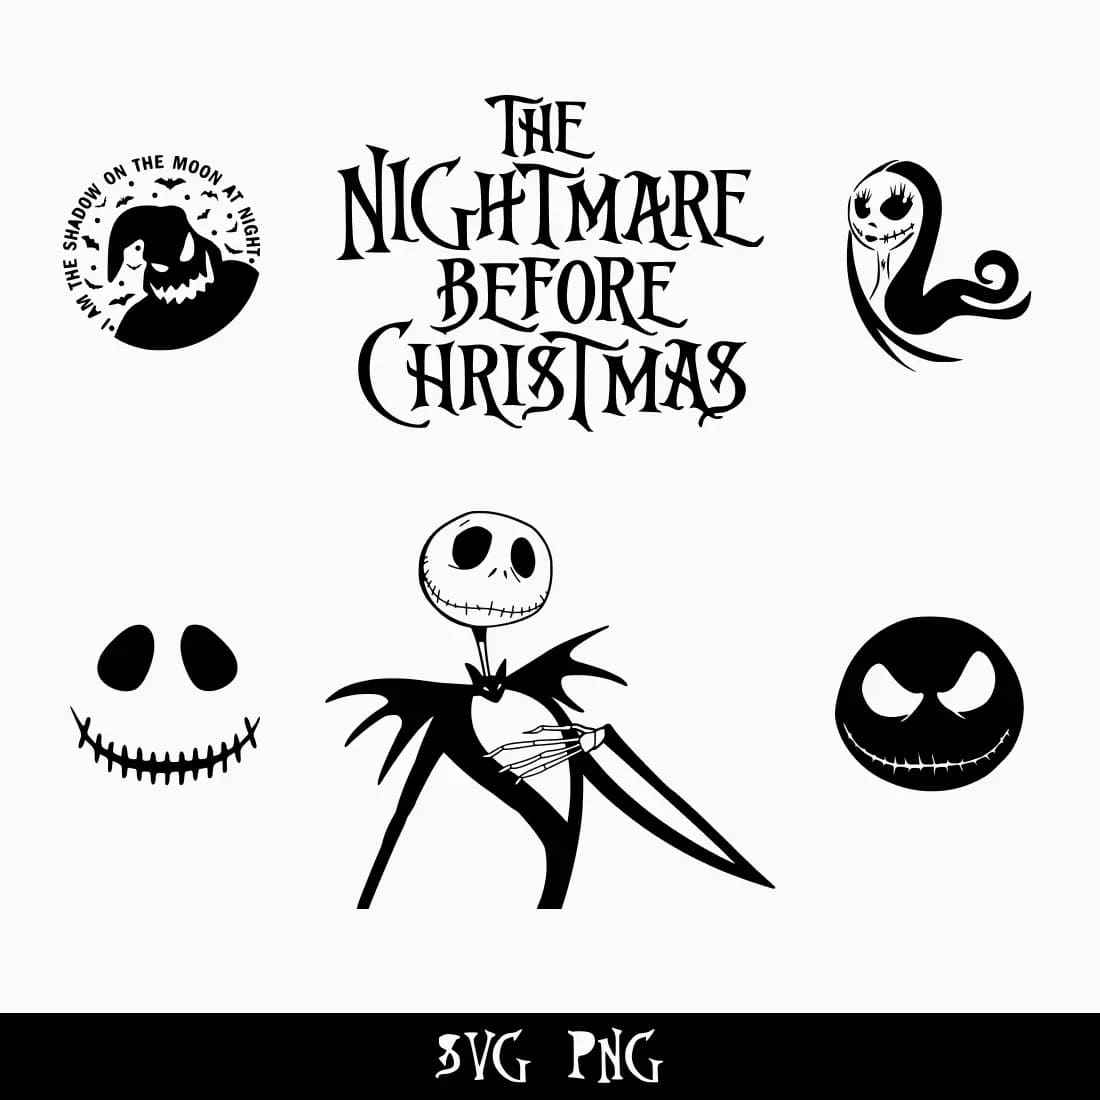 Nightmare Before Christmas SVG Bundle Preview 9.